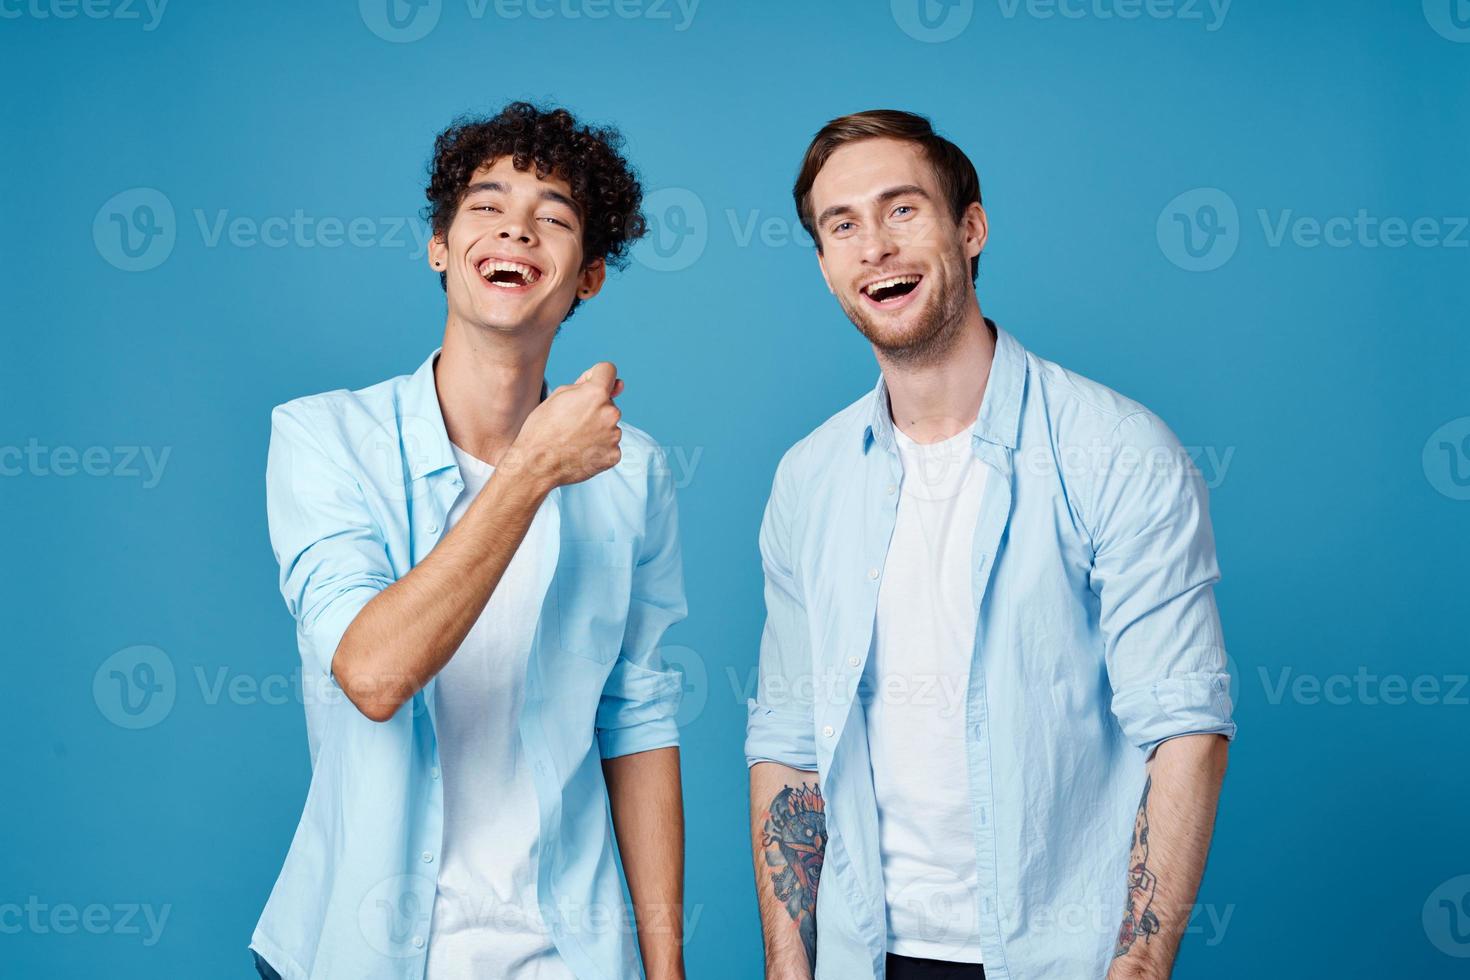 Happy friends in identical shirts chatting on a blue background fun model photo